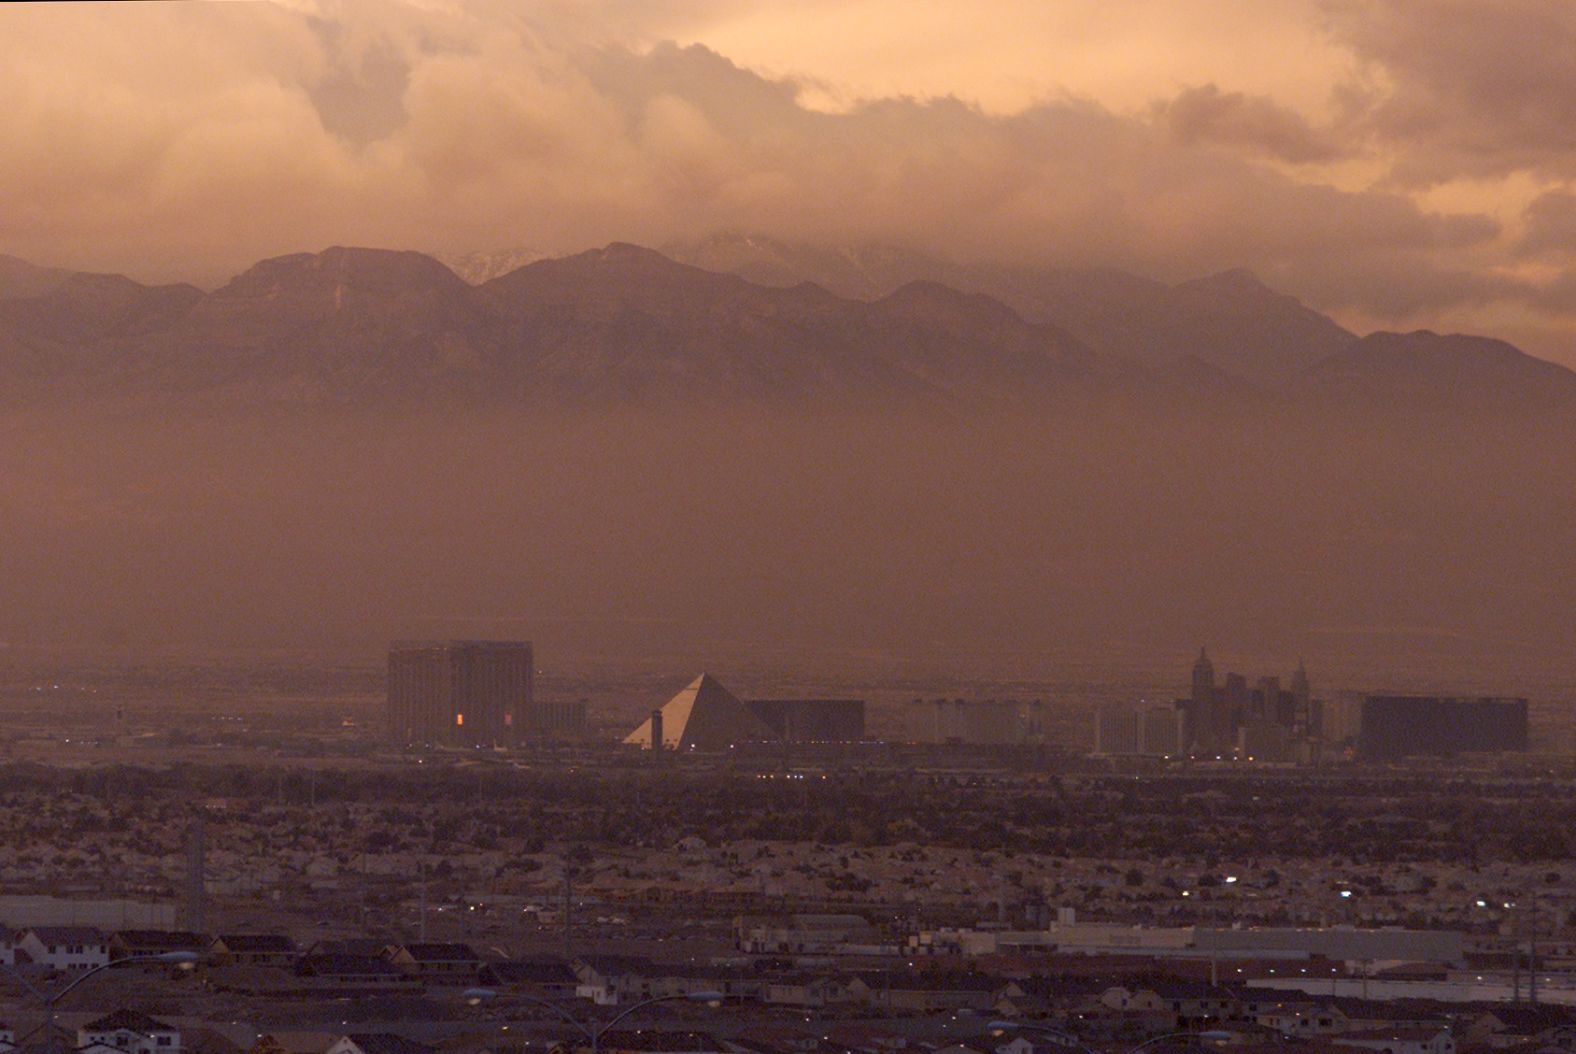 A layer of smog is visible over the Las Vegas Strip at dusk circa 2001.